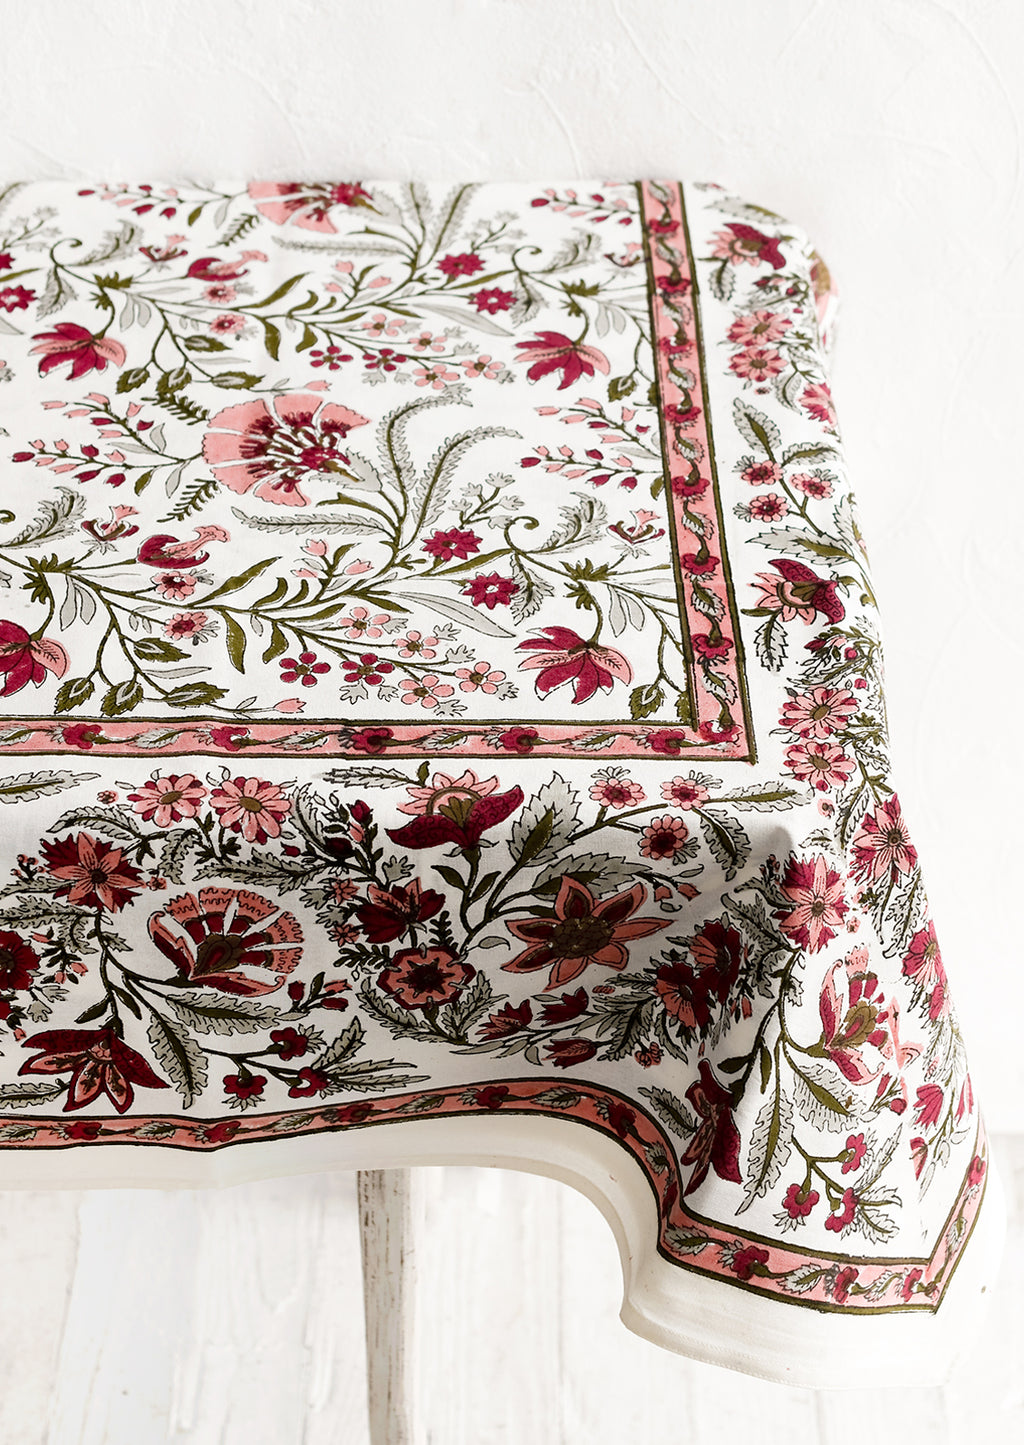 2: A block printed, floral patterned tablecloth in shades of pink and sage green.